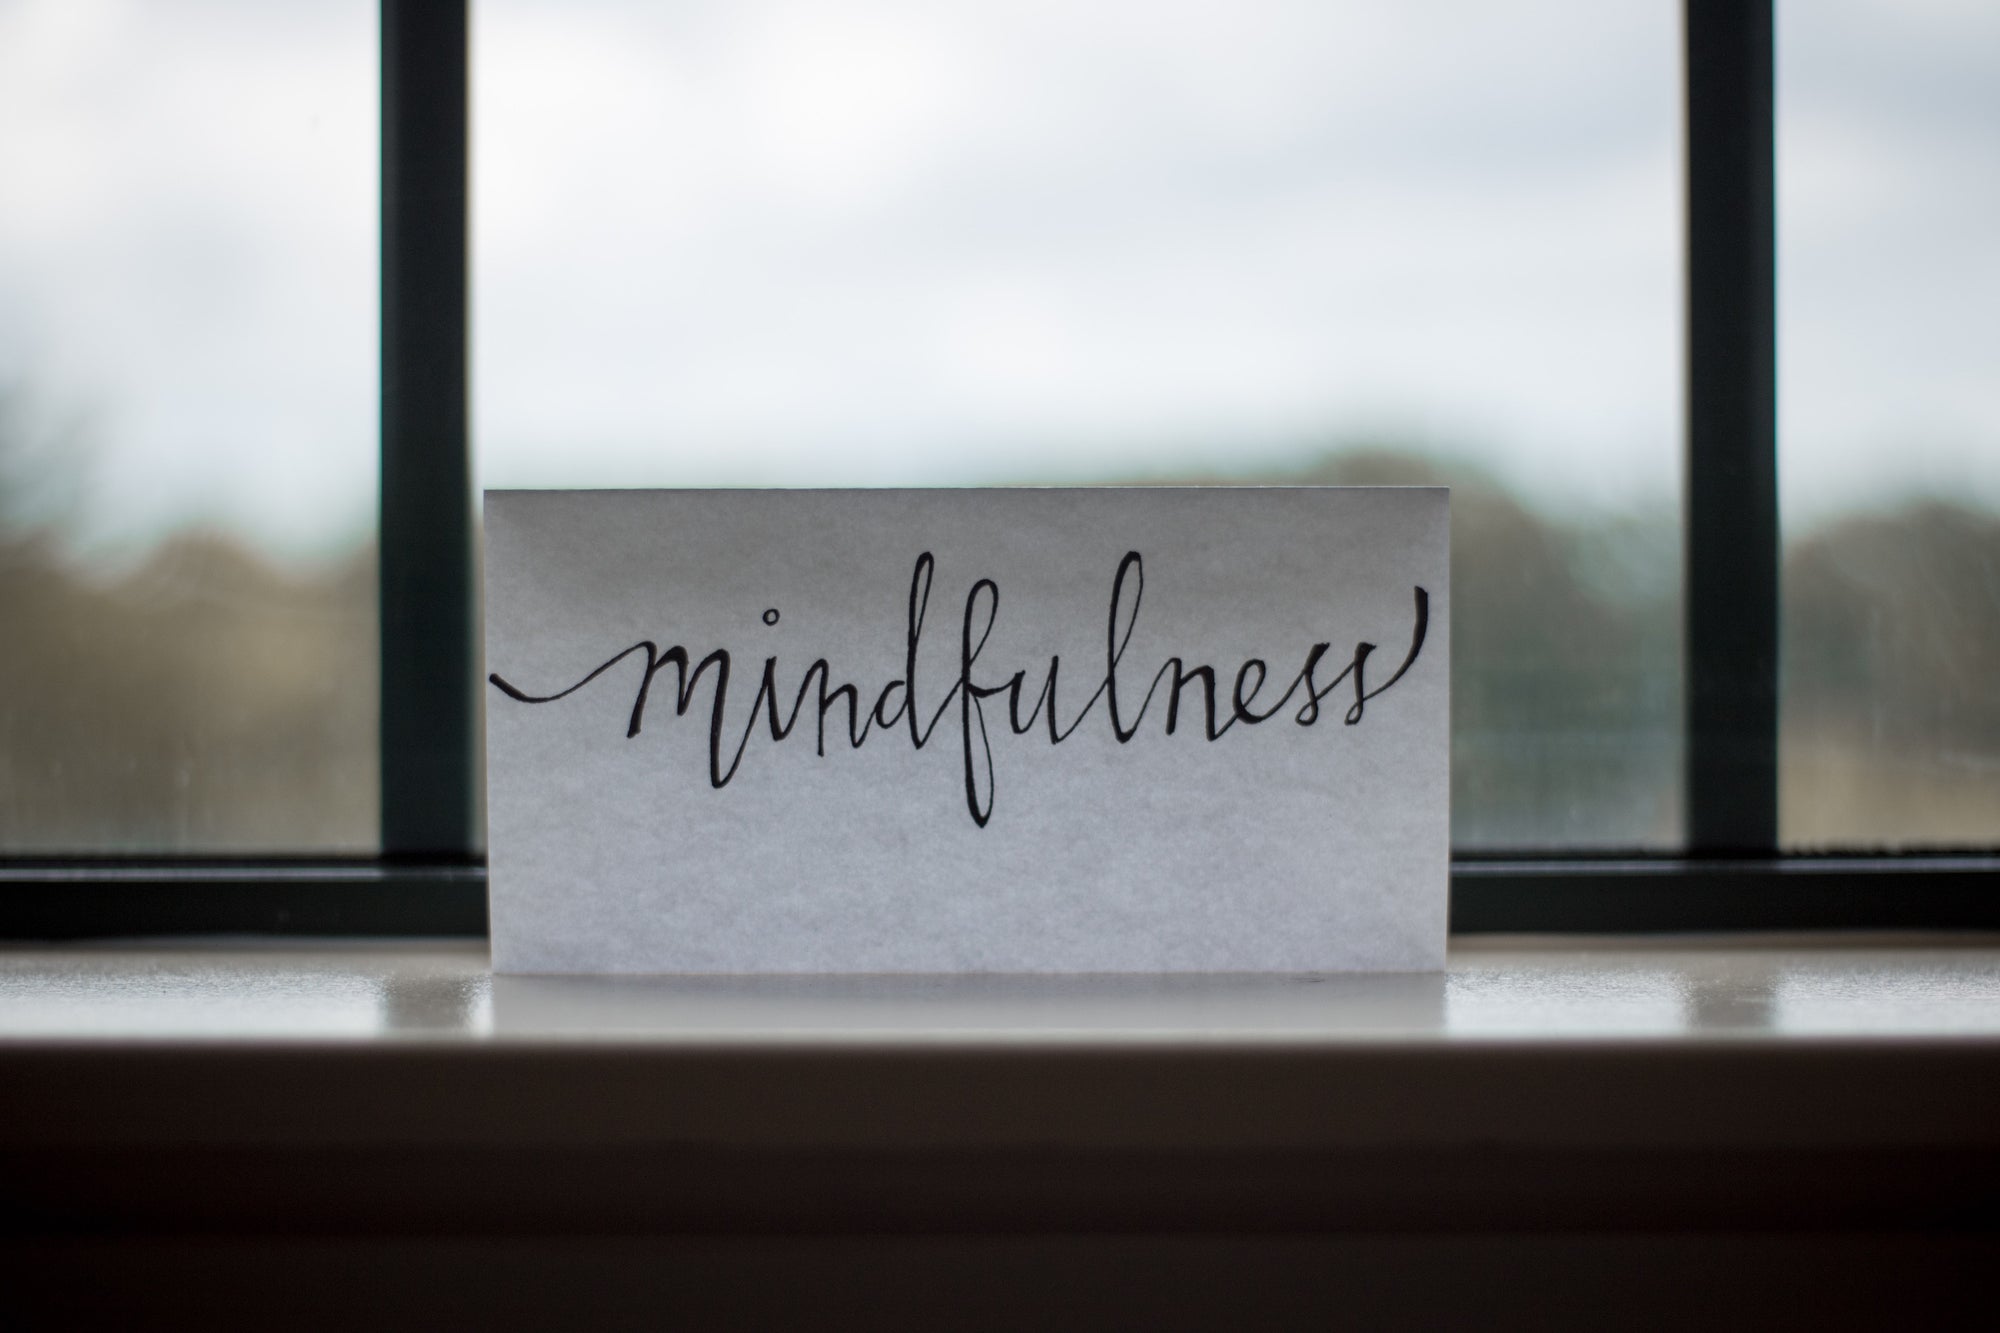 Mindfulness - How a Positive Mindset Can Fundamentally Improve Your Life